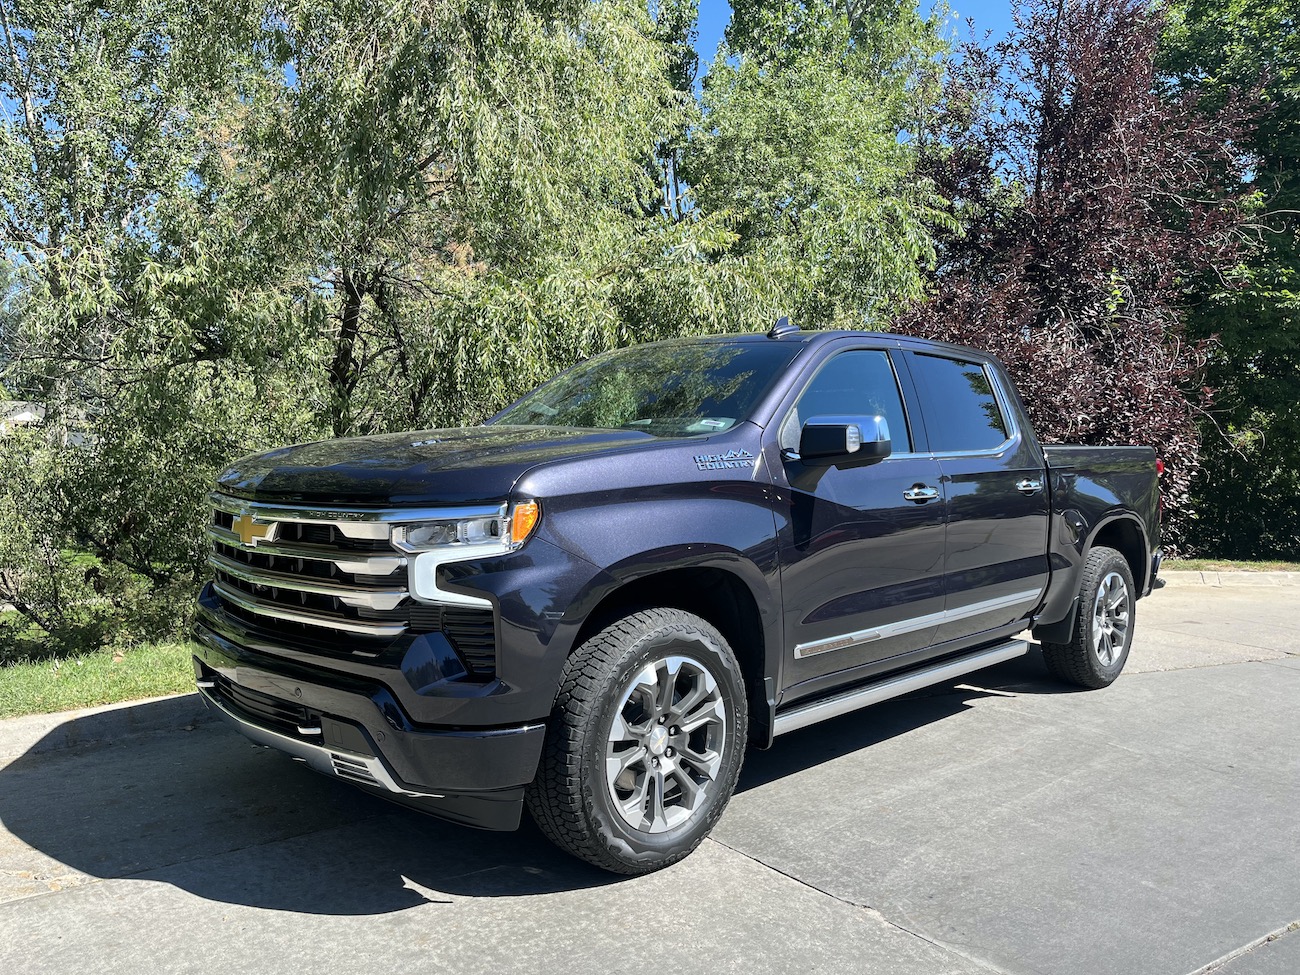 A front corner view of the 2022 Chevy Silverado High Country.